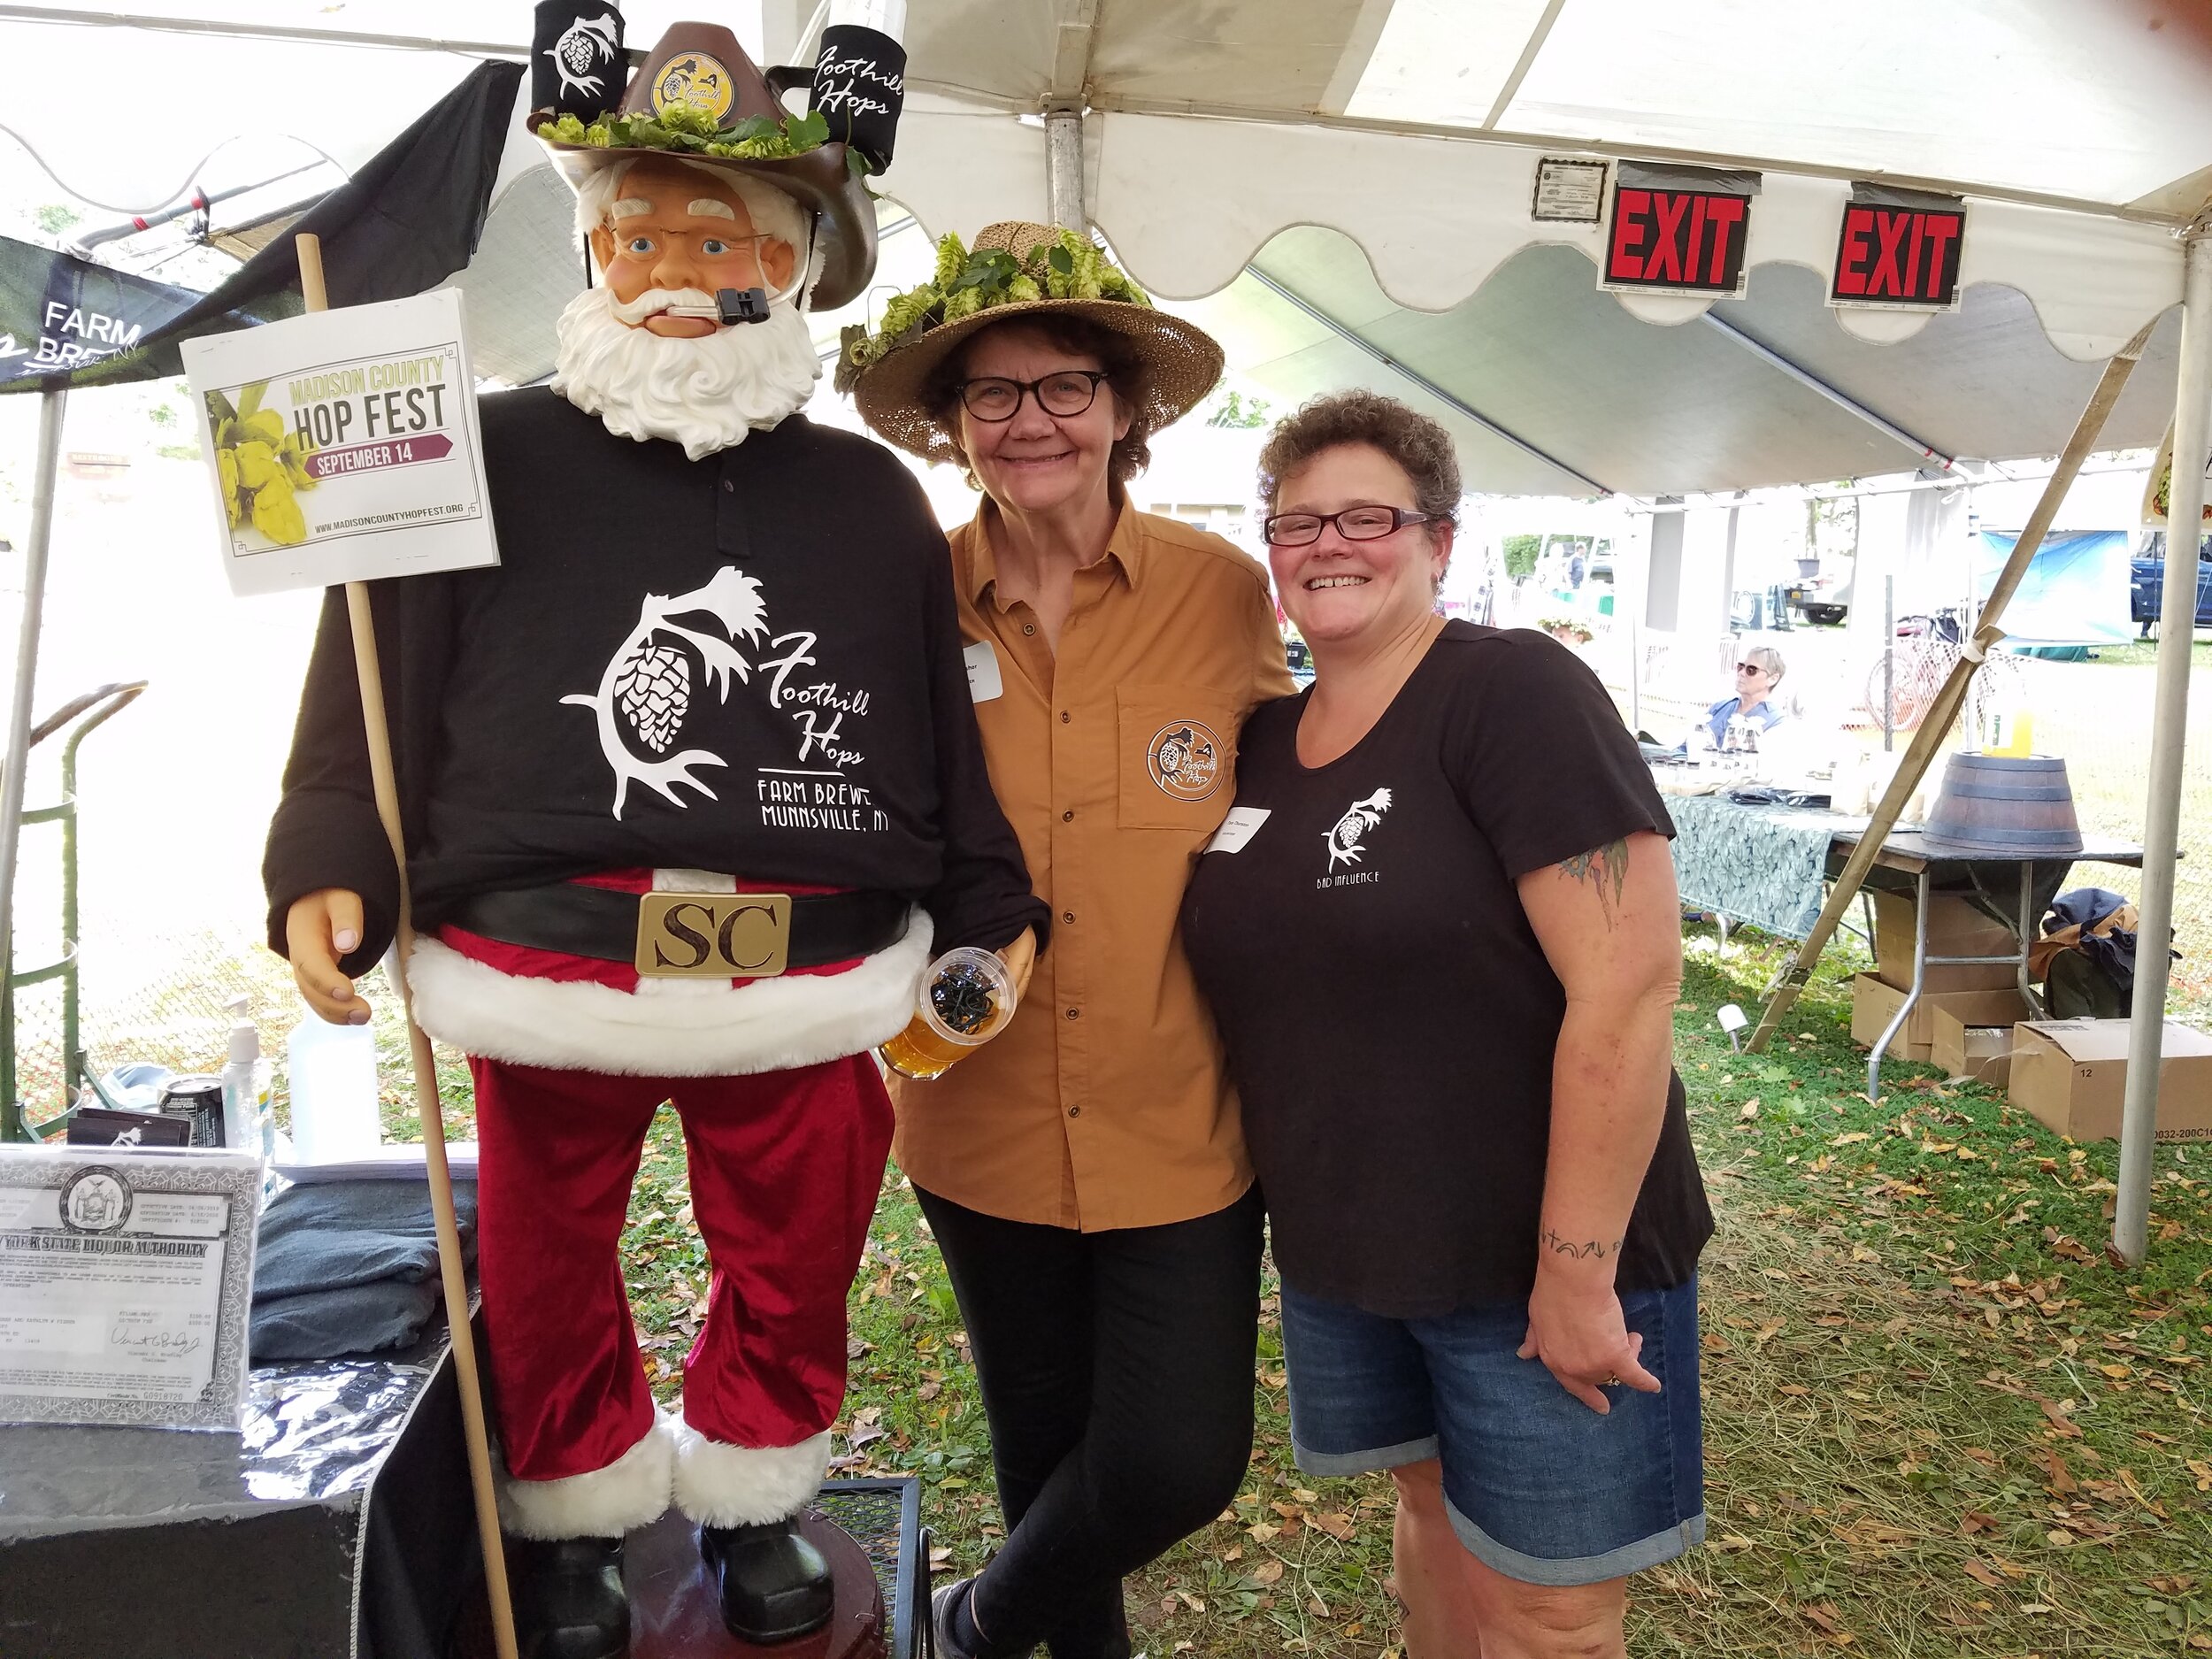 Animated Santa figure, female brewery owner and woman at beer festival.